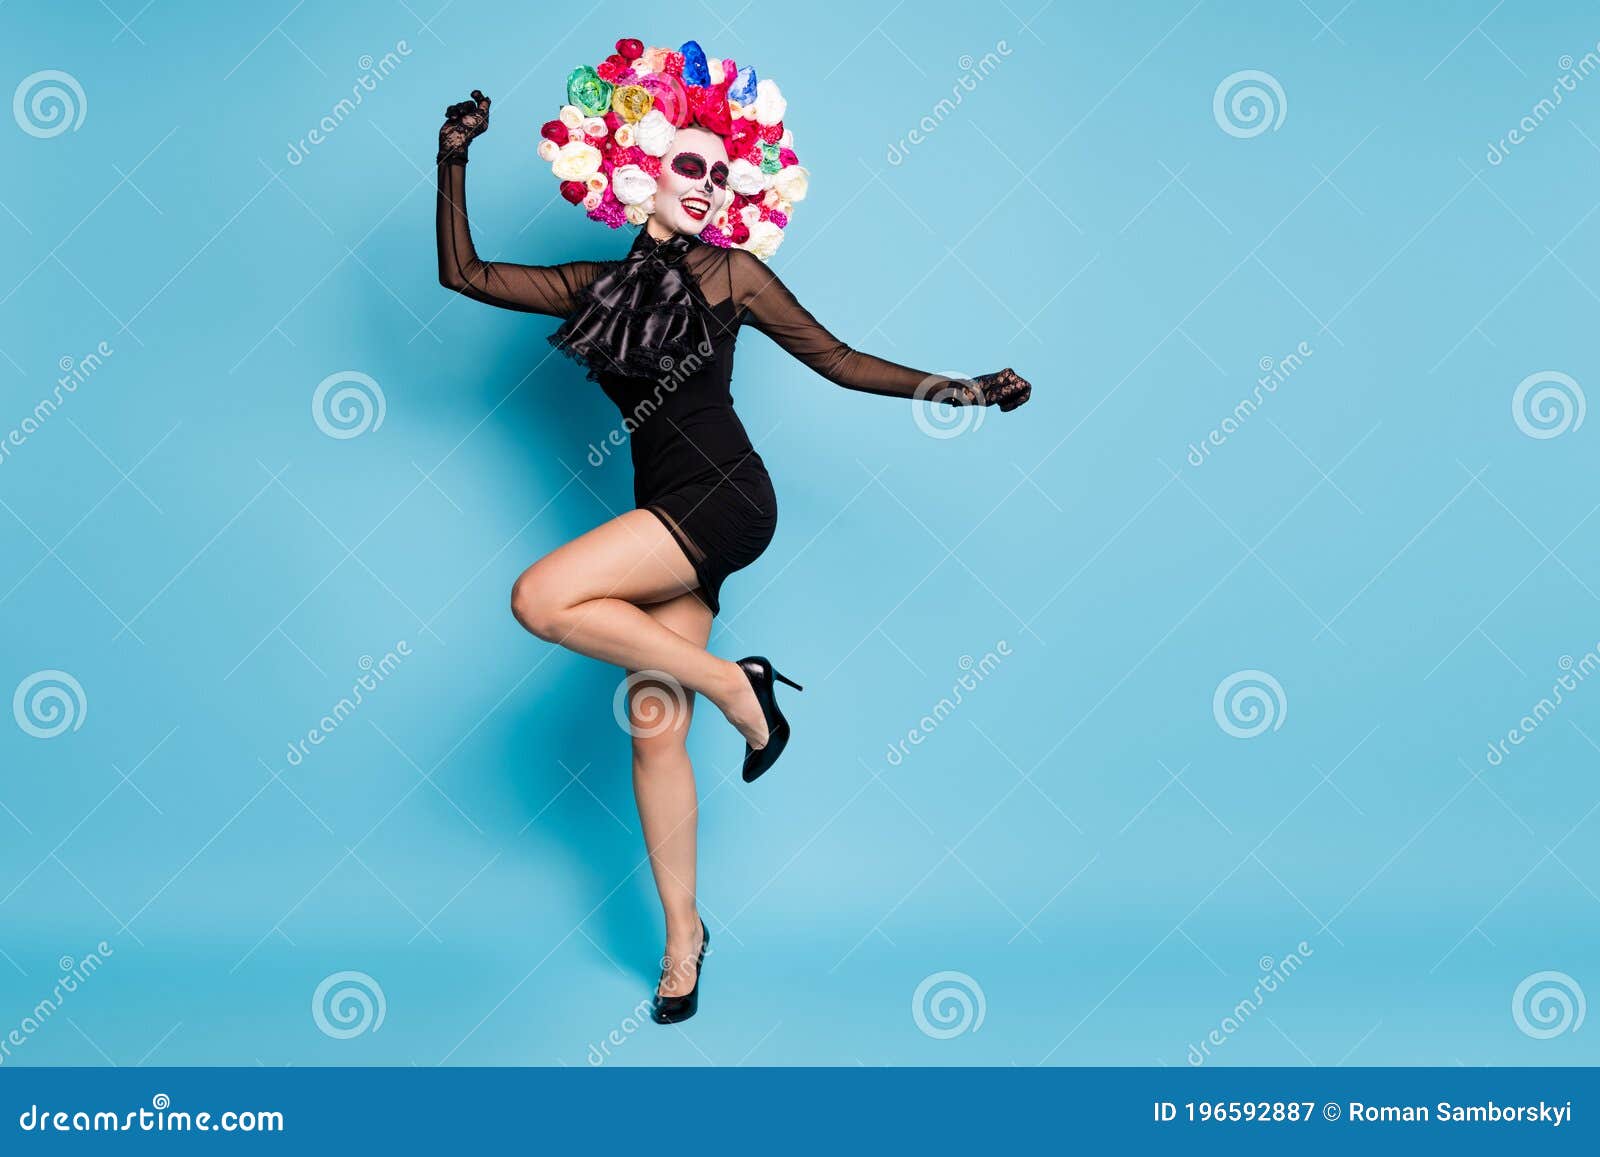 Full Length Photo of Scary Creature Lady Dance Competition Latin Theme  Event Wear Black Lace Short Mini Dress High Heels Stock Image - Image of  masquerade, beautiful: 196592887